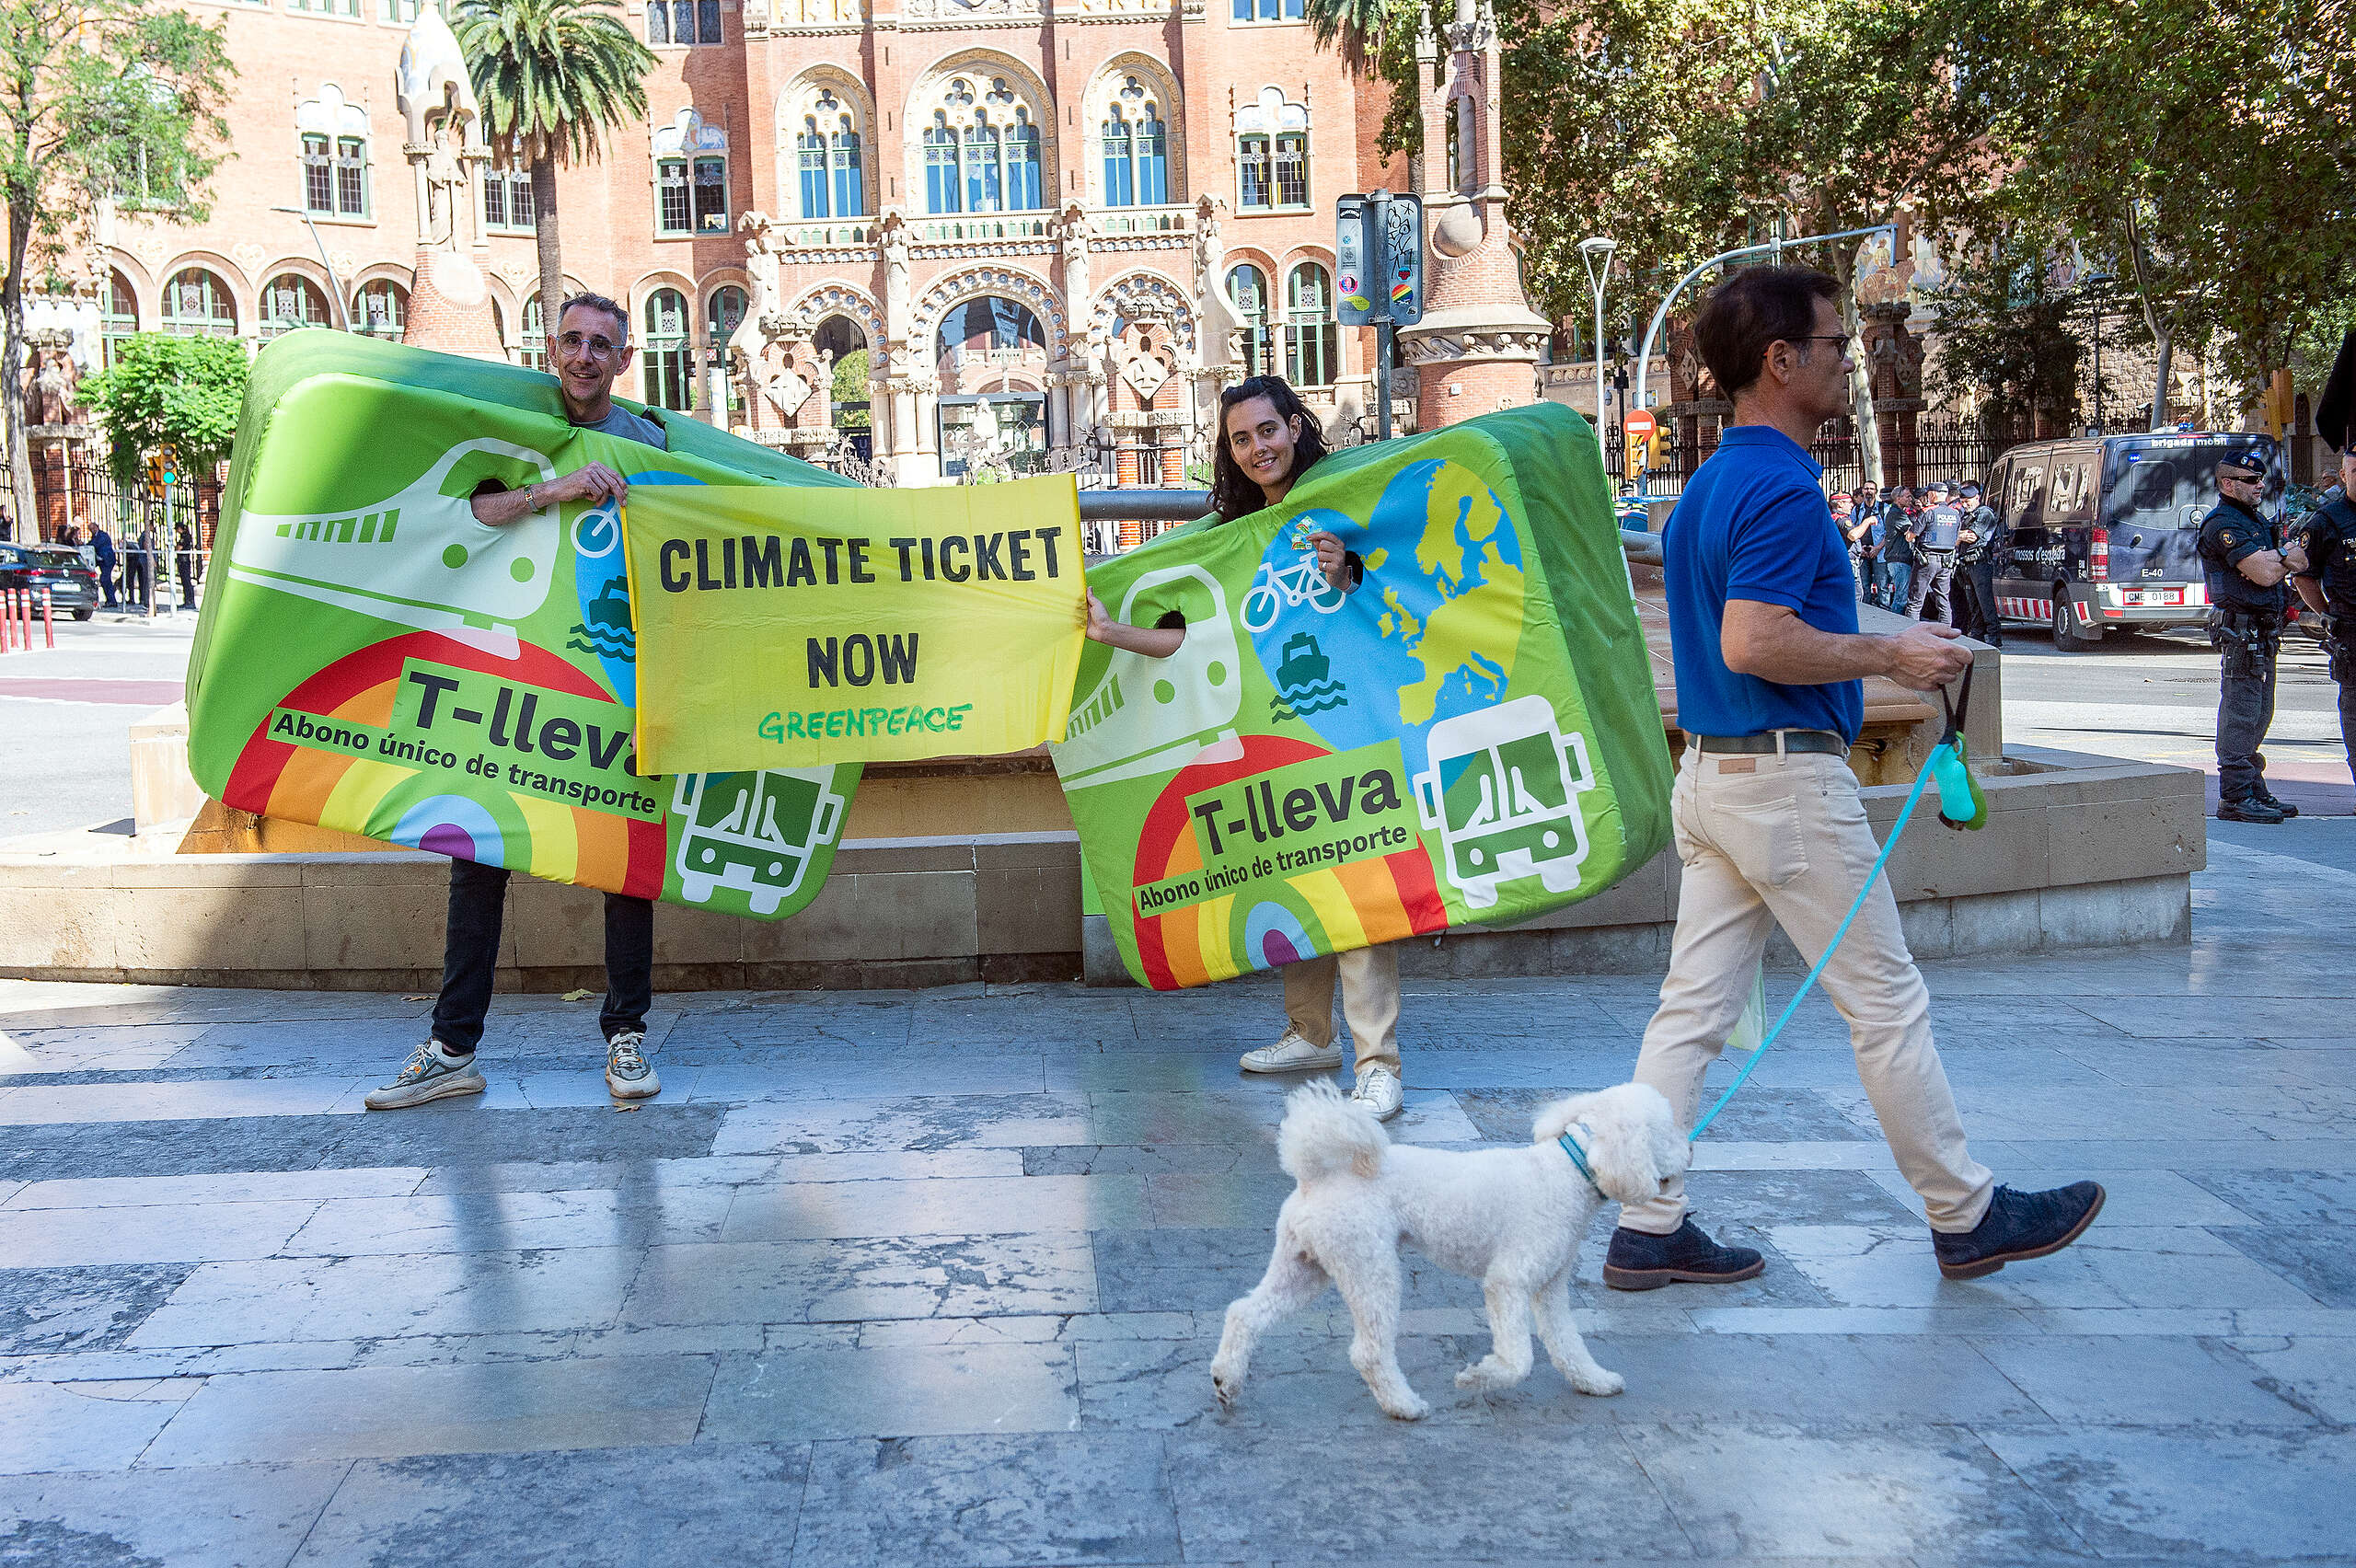 Greenpeace Spain holds up a banner to European transport ministers meeting in Barcelona saying "Climate ticket now" to call for a single season ticket for the whole country.